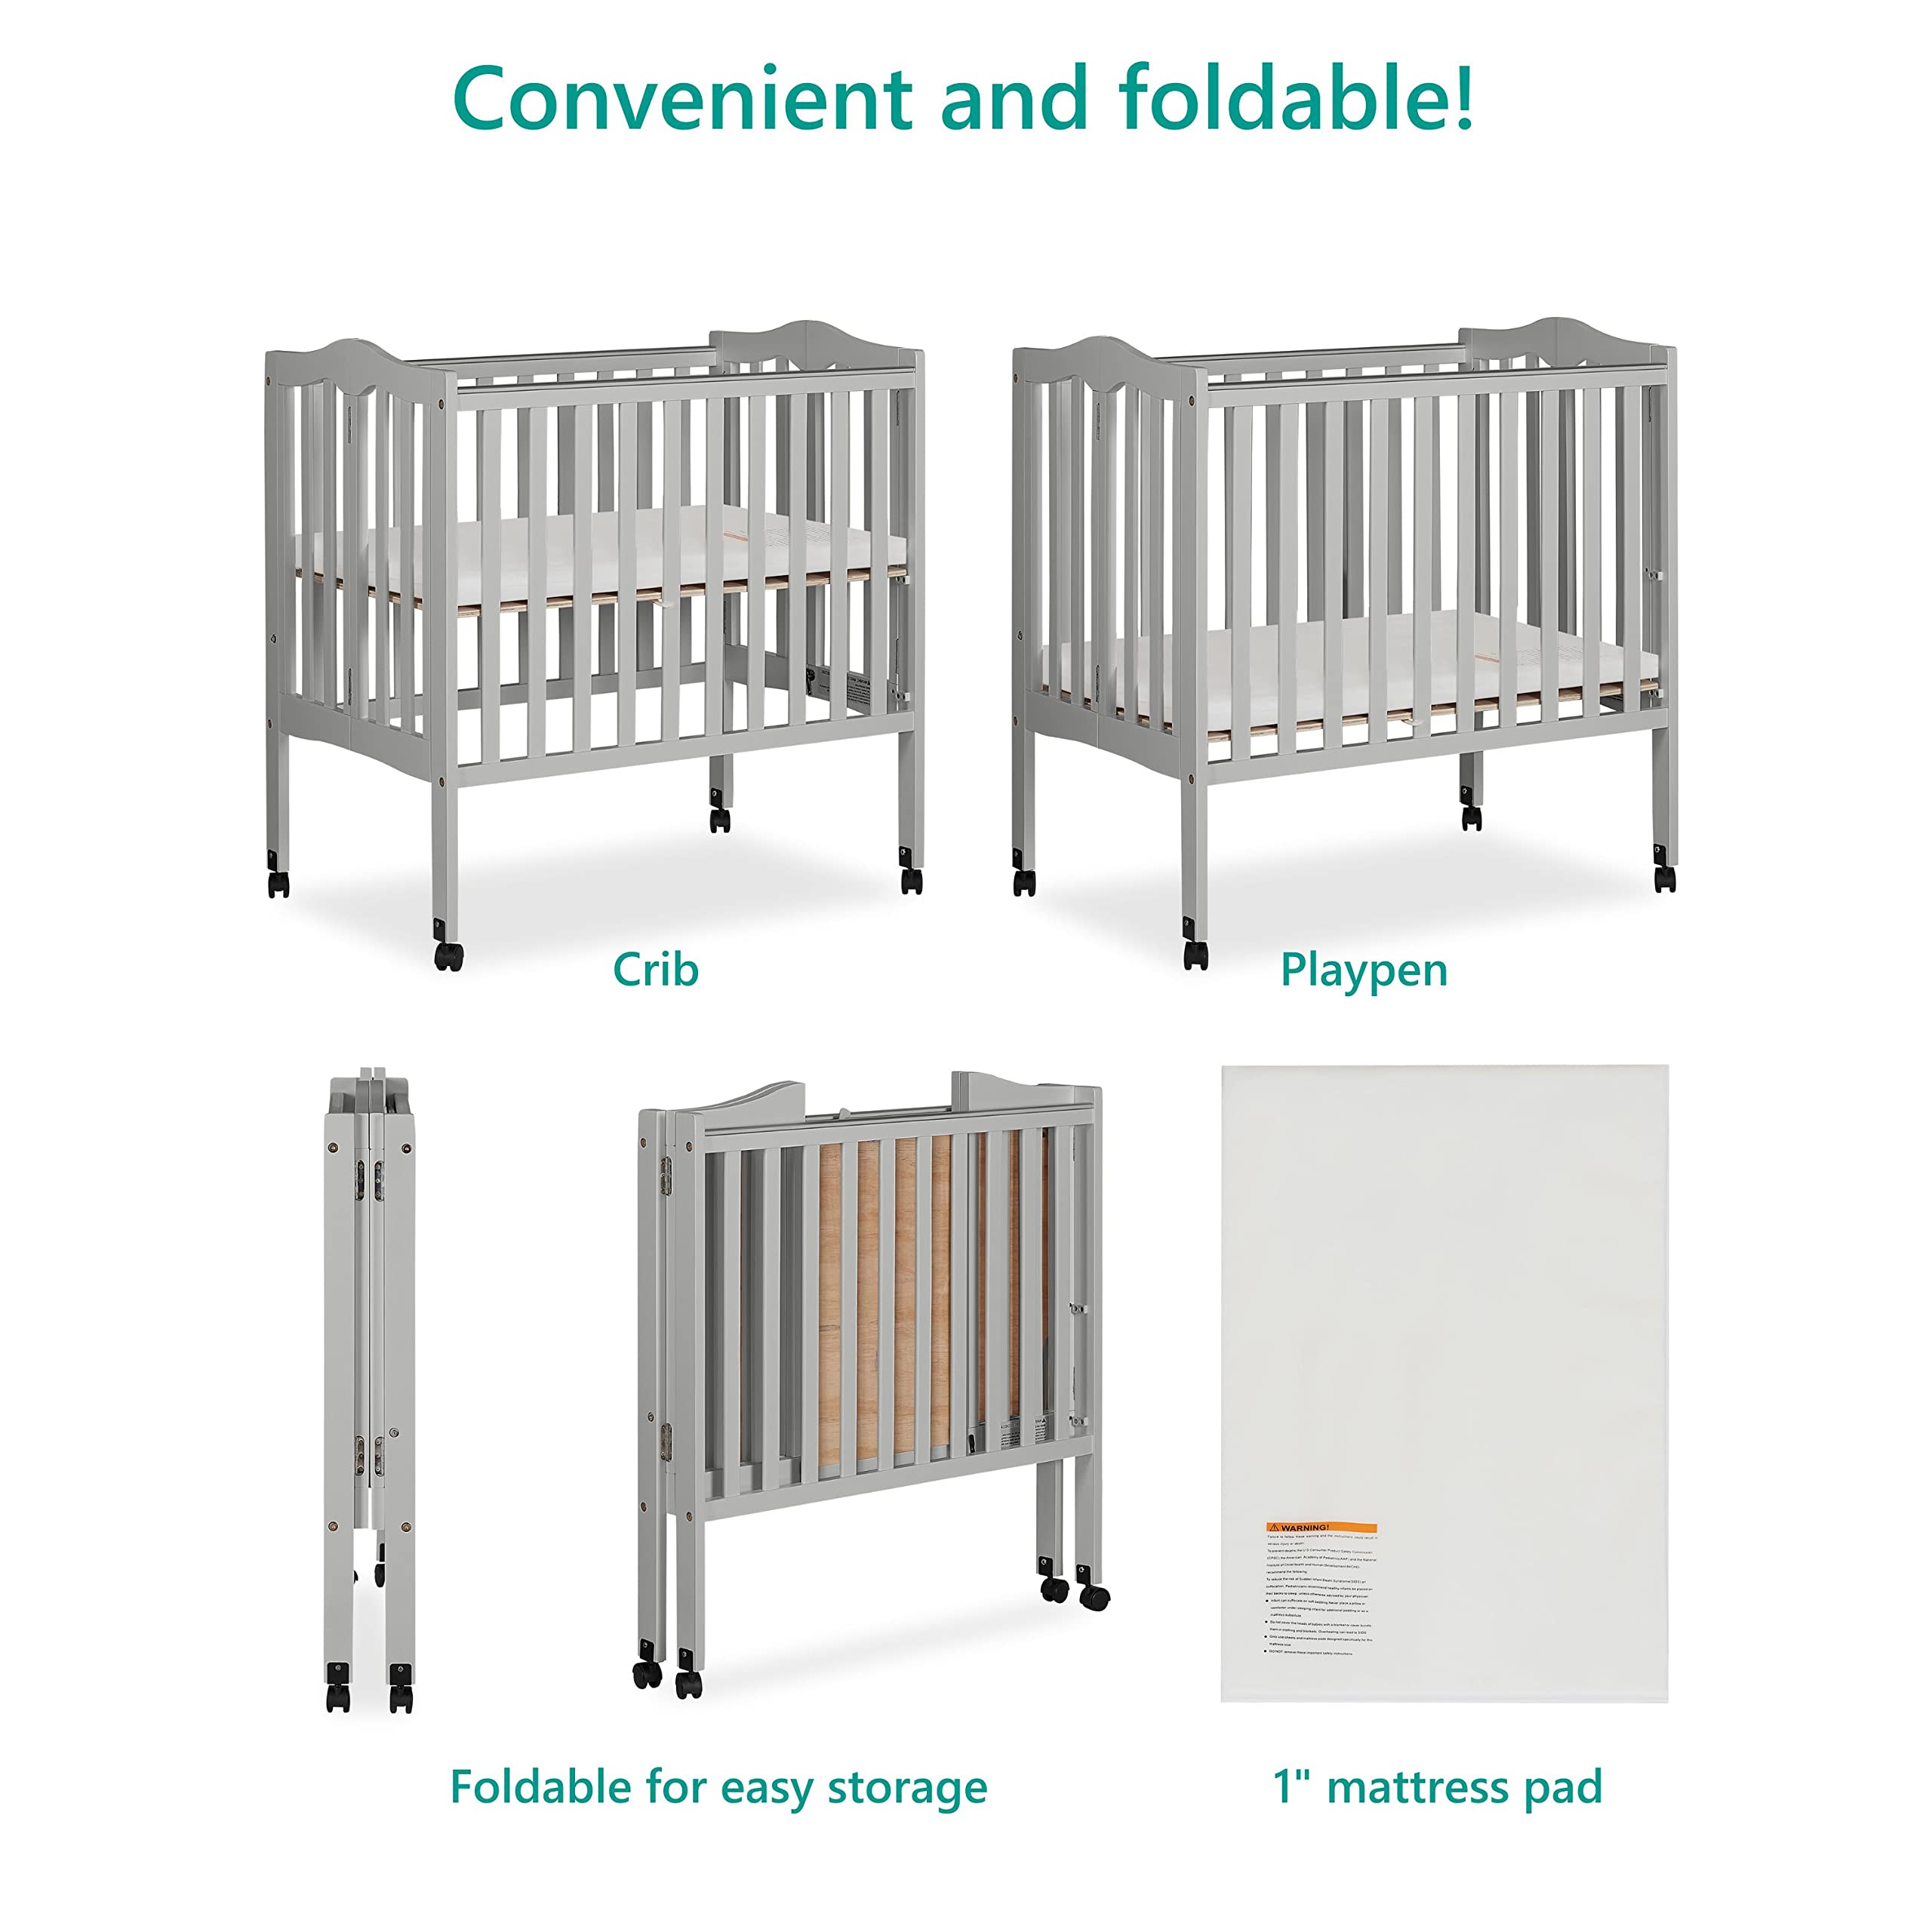 Dream On Me 2-in-1 Lightweight Folding Portable Stationary Side Crib in Pebble Grey, Greenguard Gold Certified, Baby Crib to Playpen, Folds Flat for Storage, Locking Wheels